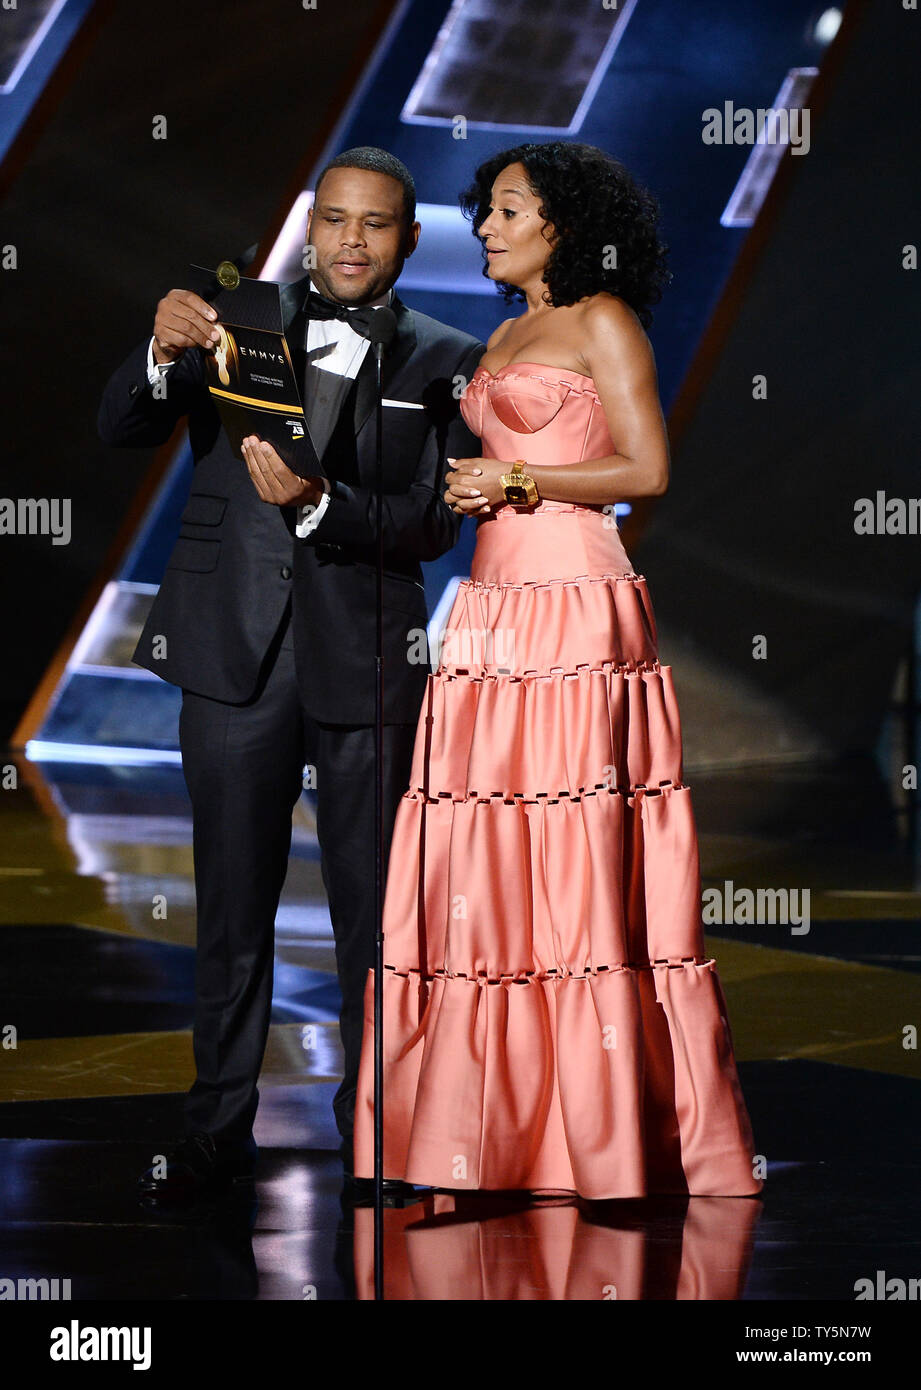 Actor Anthony Anderson (L) and actress Tracee Ellis onstage during the 67th Primetime Emmy Awards in the Microsoft Theater in Los Angeles on September 20, 2015.   Photo by Ken Matsui/UPI. Stock Photo